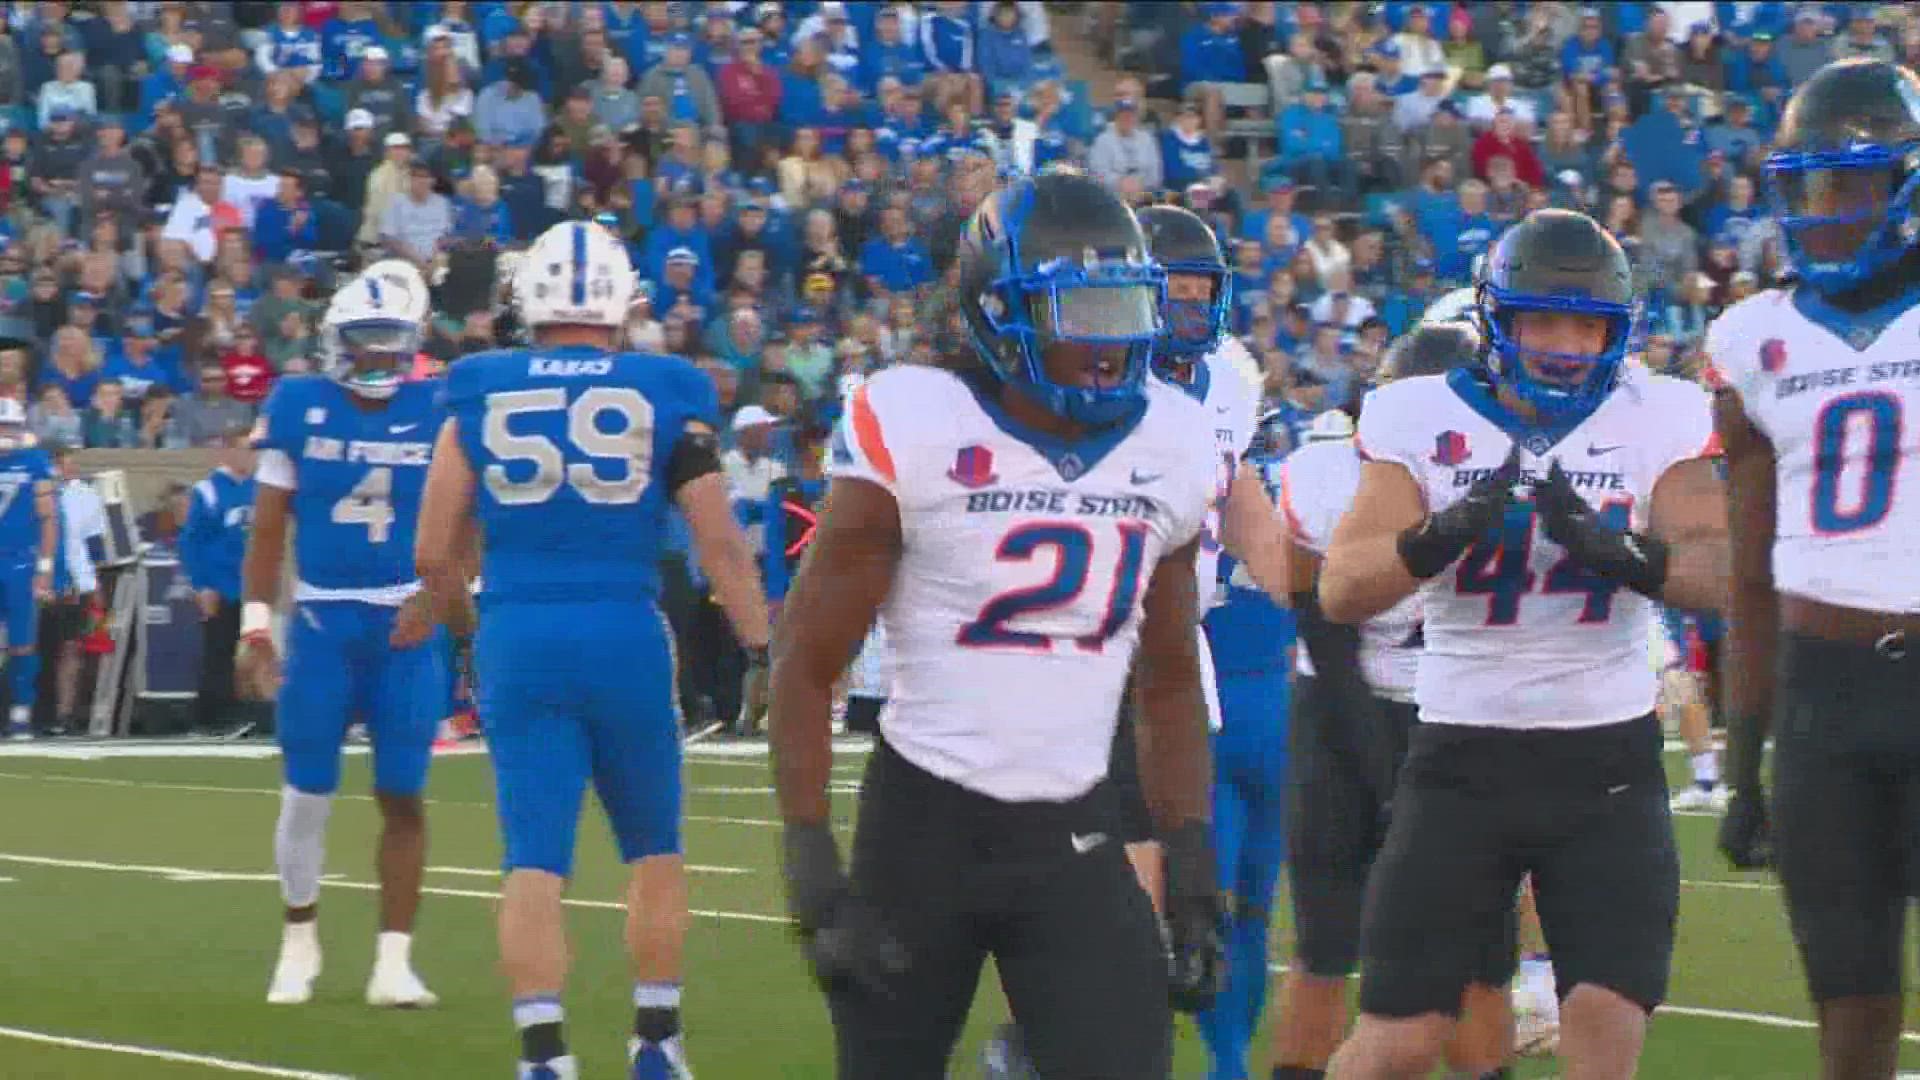 Boise State held Air Force, the No. 1 rushing offense in the FBS, to just 175 yards last Saturday in Colorado Springs, but the Broncos believe they can improve.